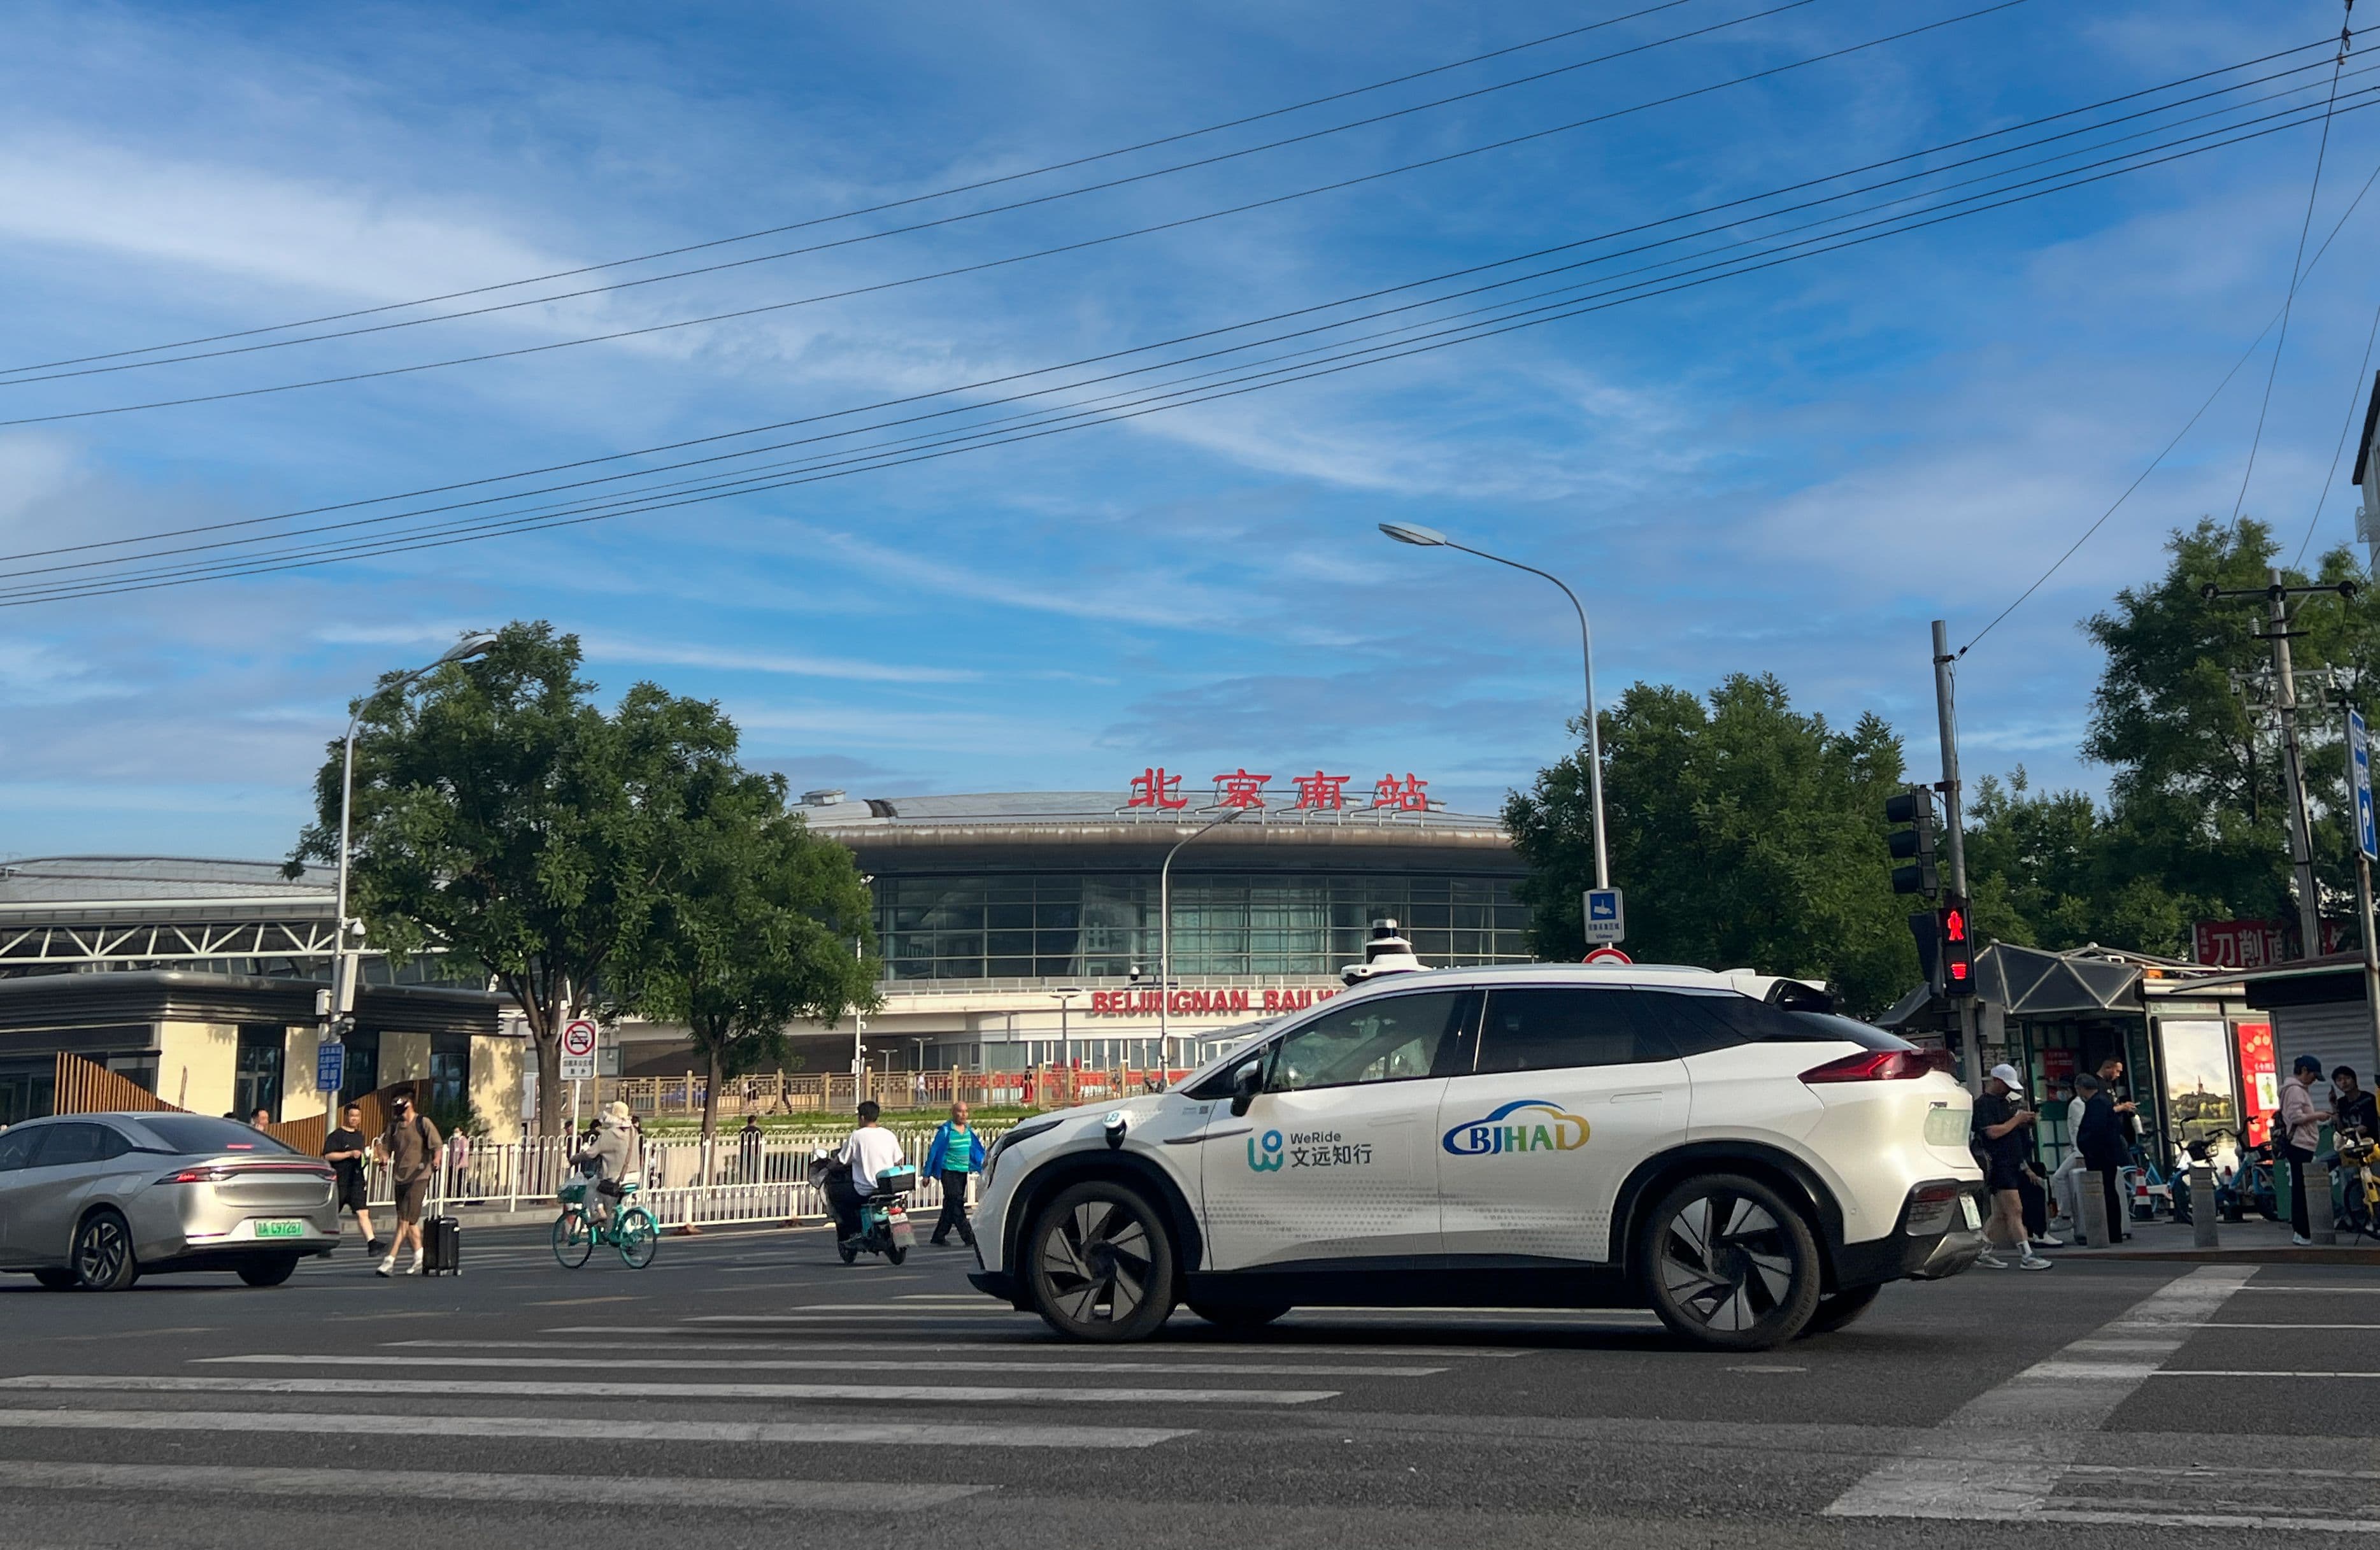 Driving into Beijing's Core Urban Area! WeRide Robotaxi Approved for Testing at Beijing South Railway Station